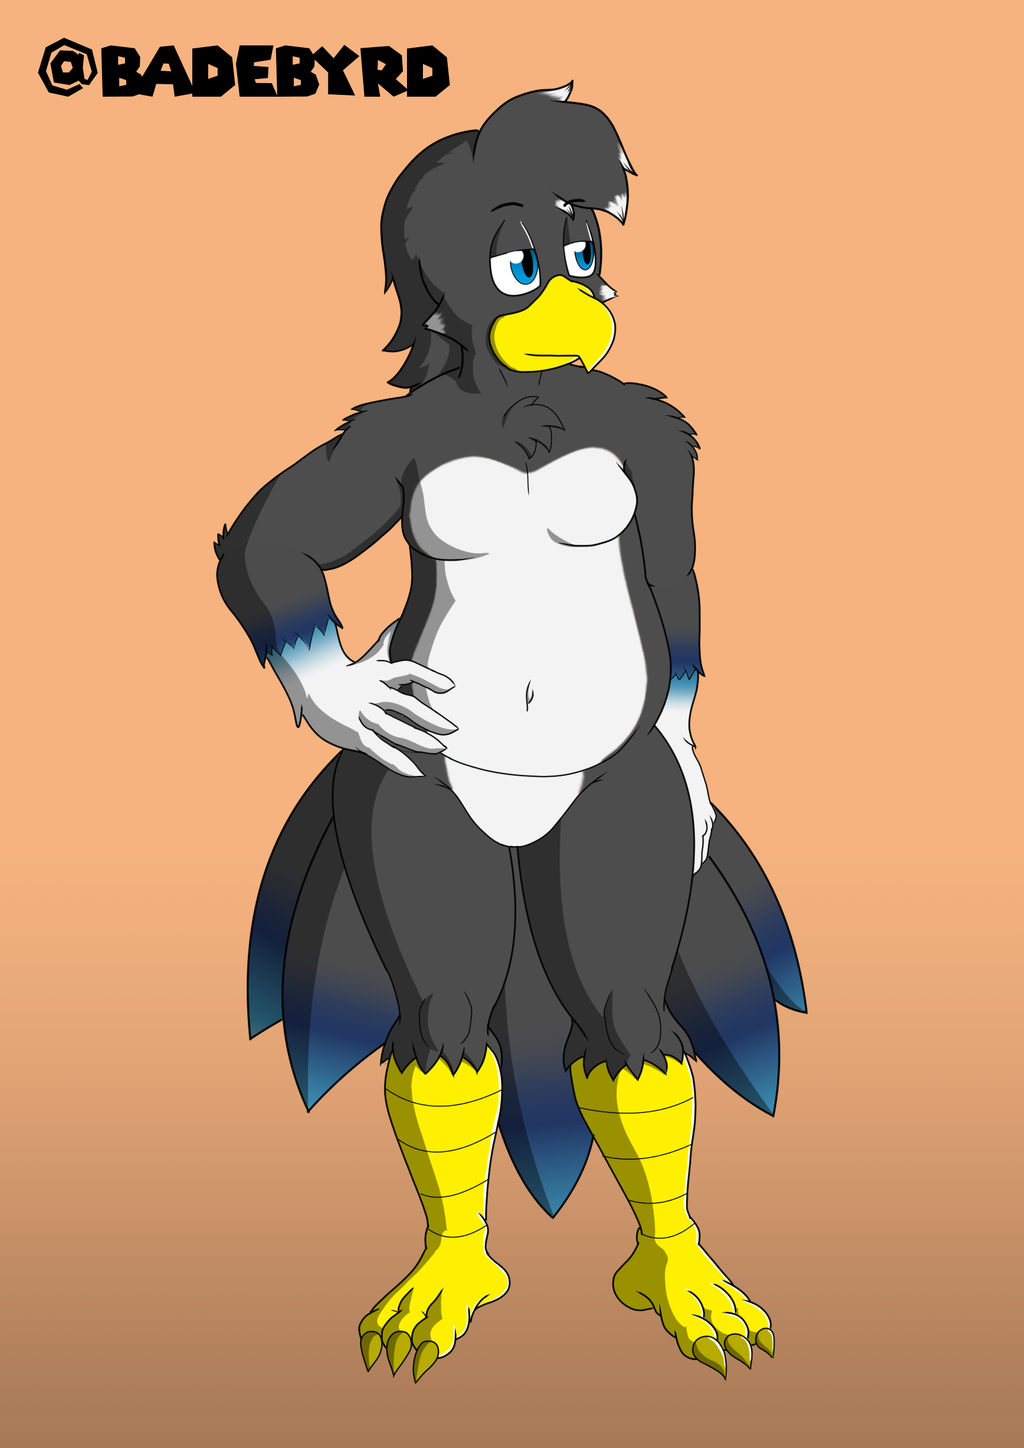 Most recent image: My Current Bird Profile